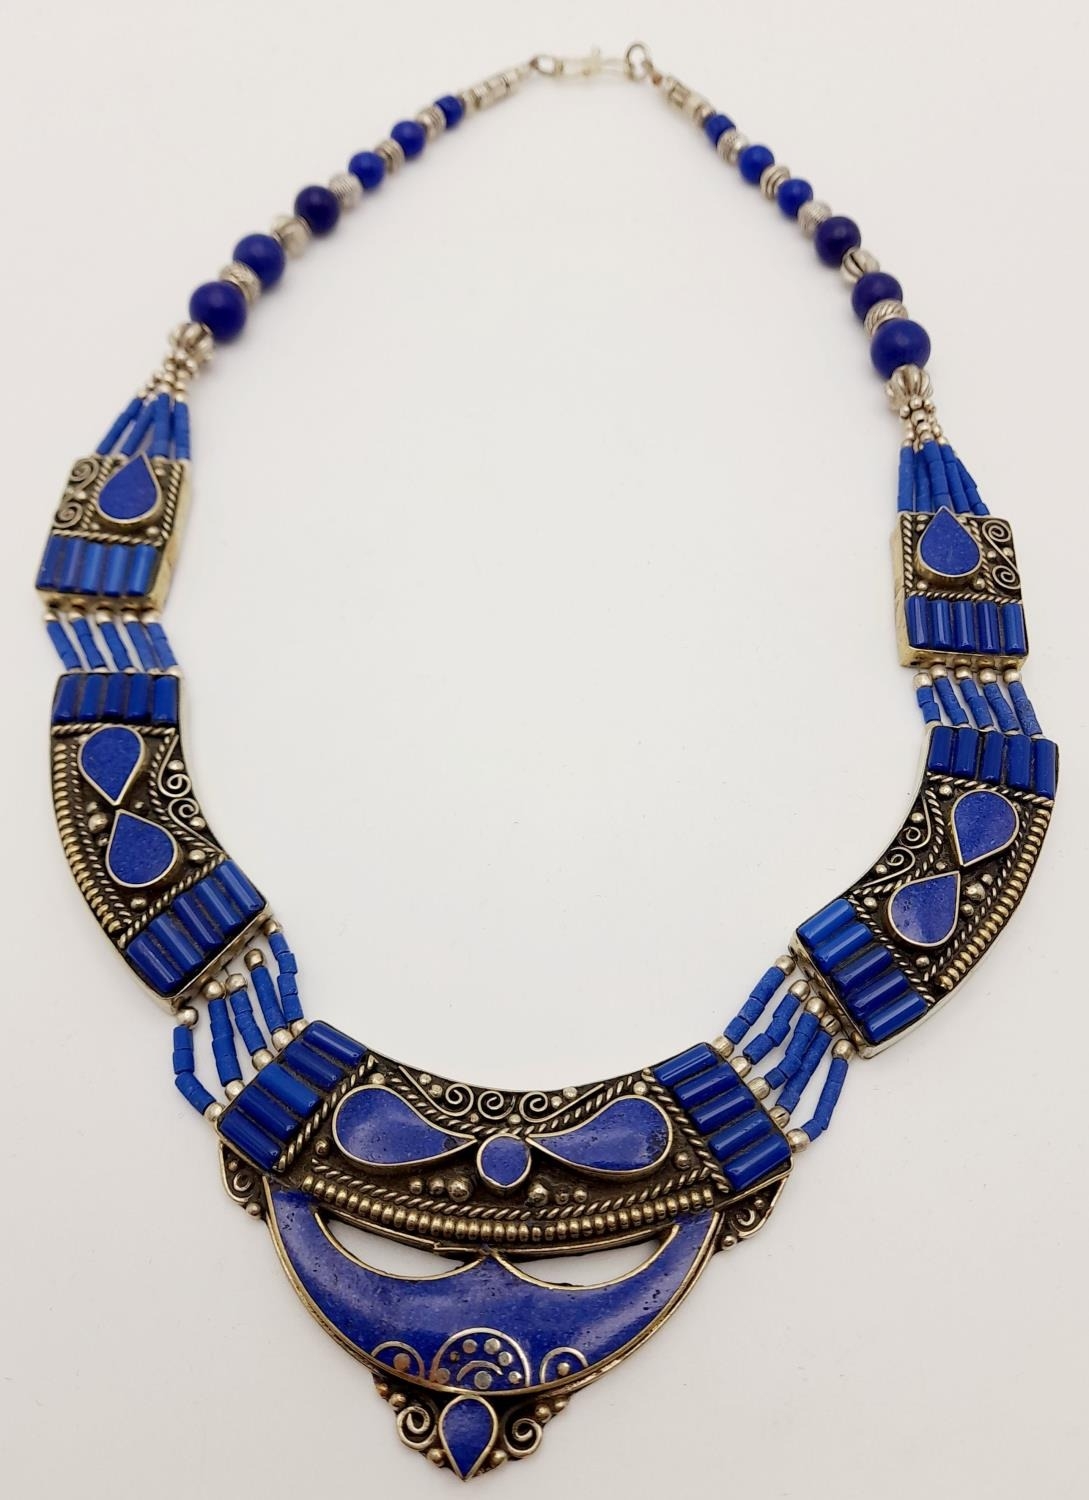 A tribal, wonderfully crafted, white metal and lapis lazuli necklace and bracelet set in a - Image 3 of 6